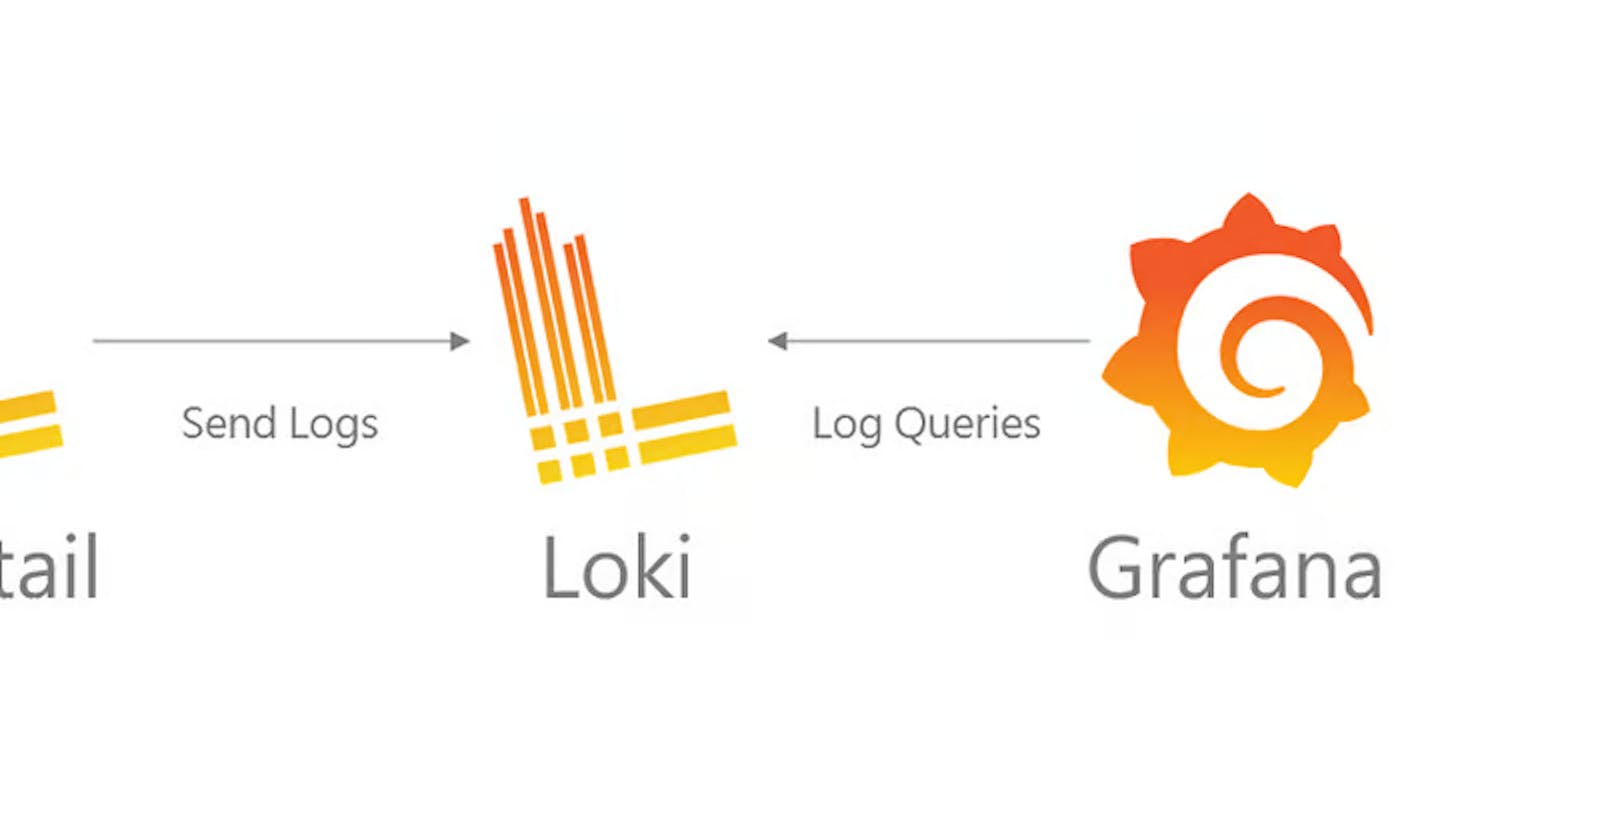 How to centralize and visualize your app logs in Grafana